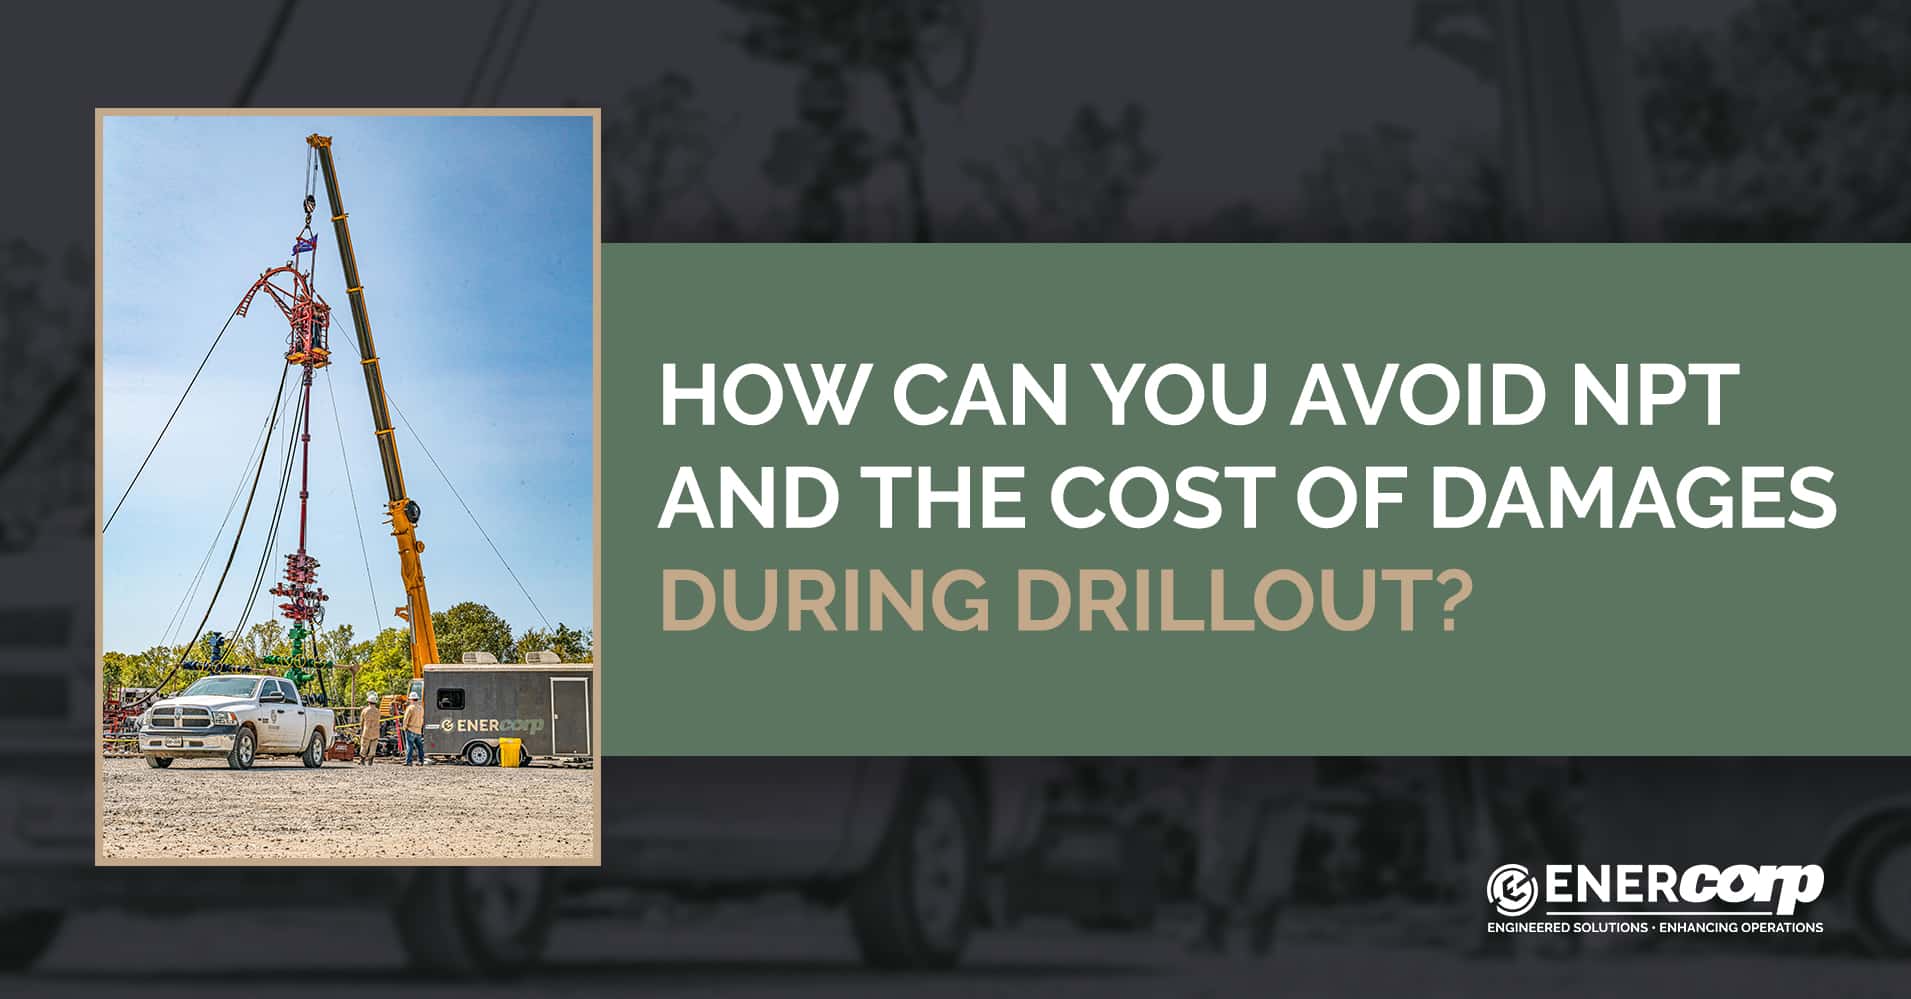 EnerCorp Drillout Article Featured Image